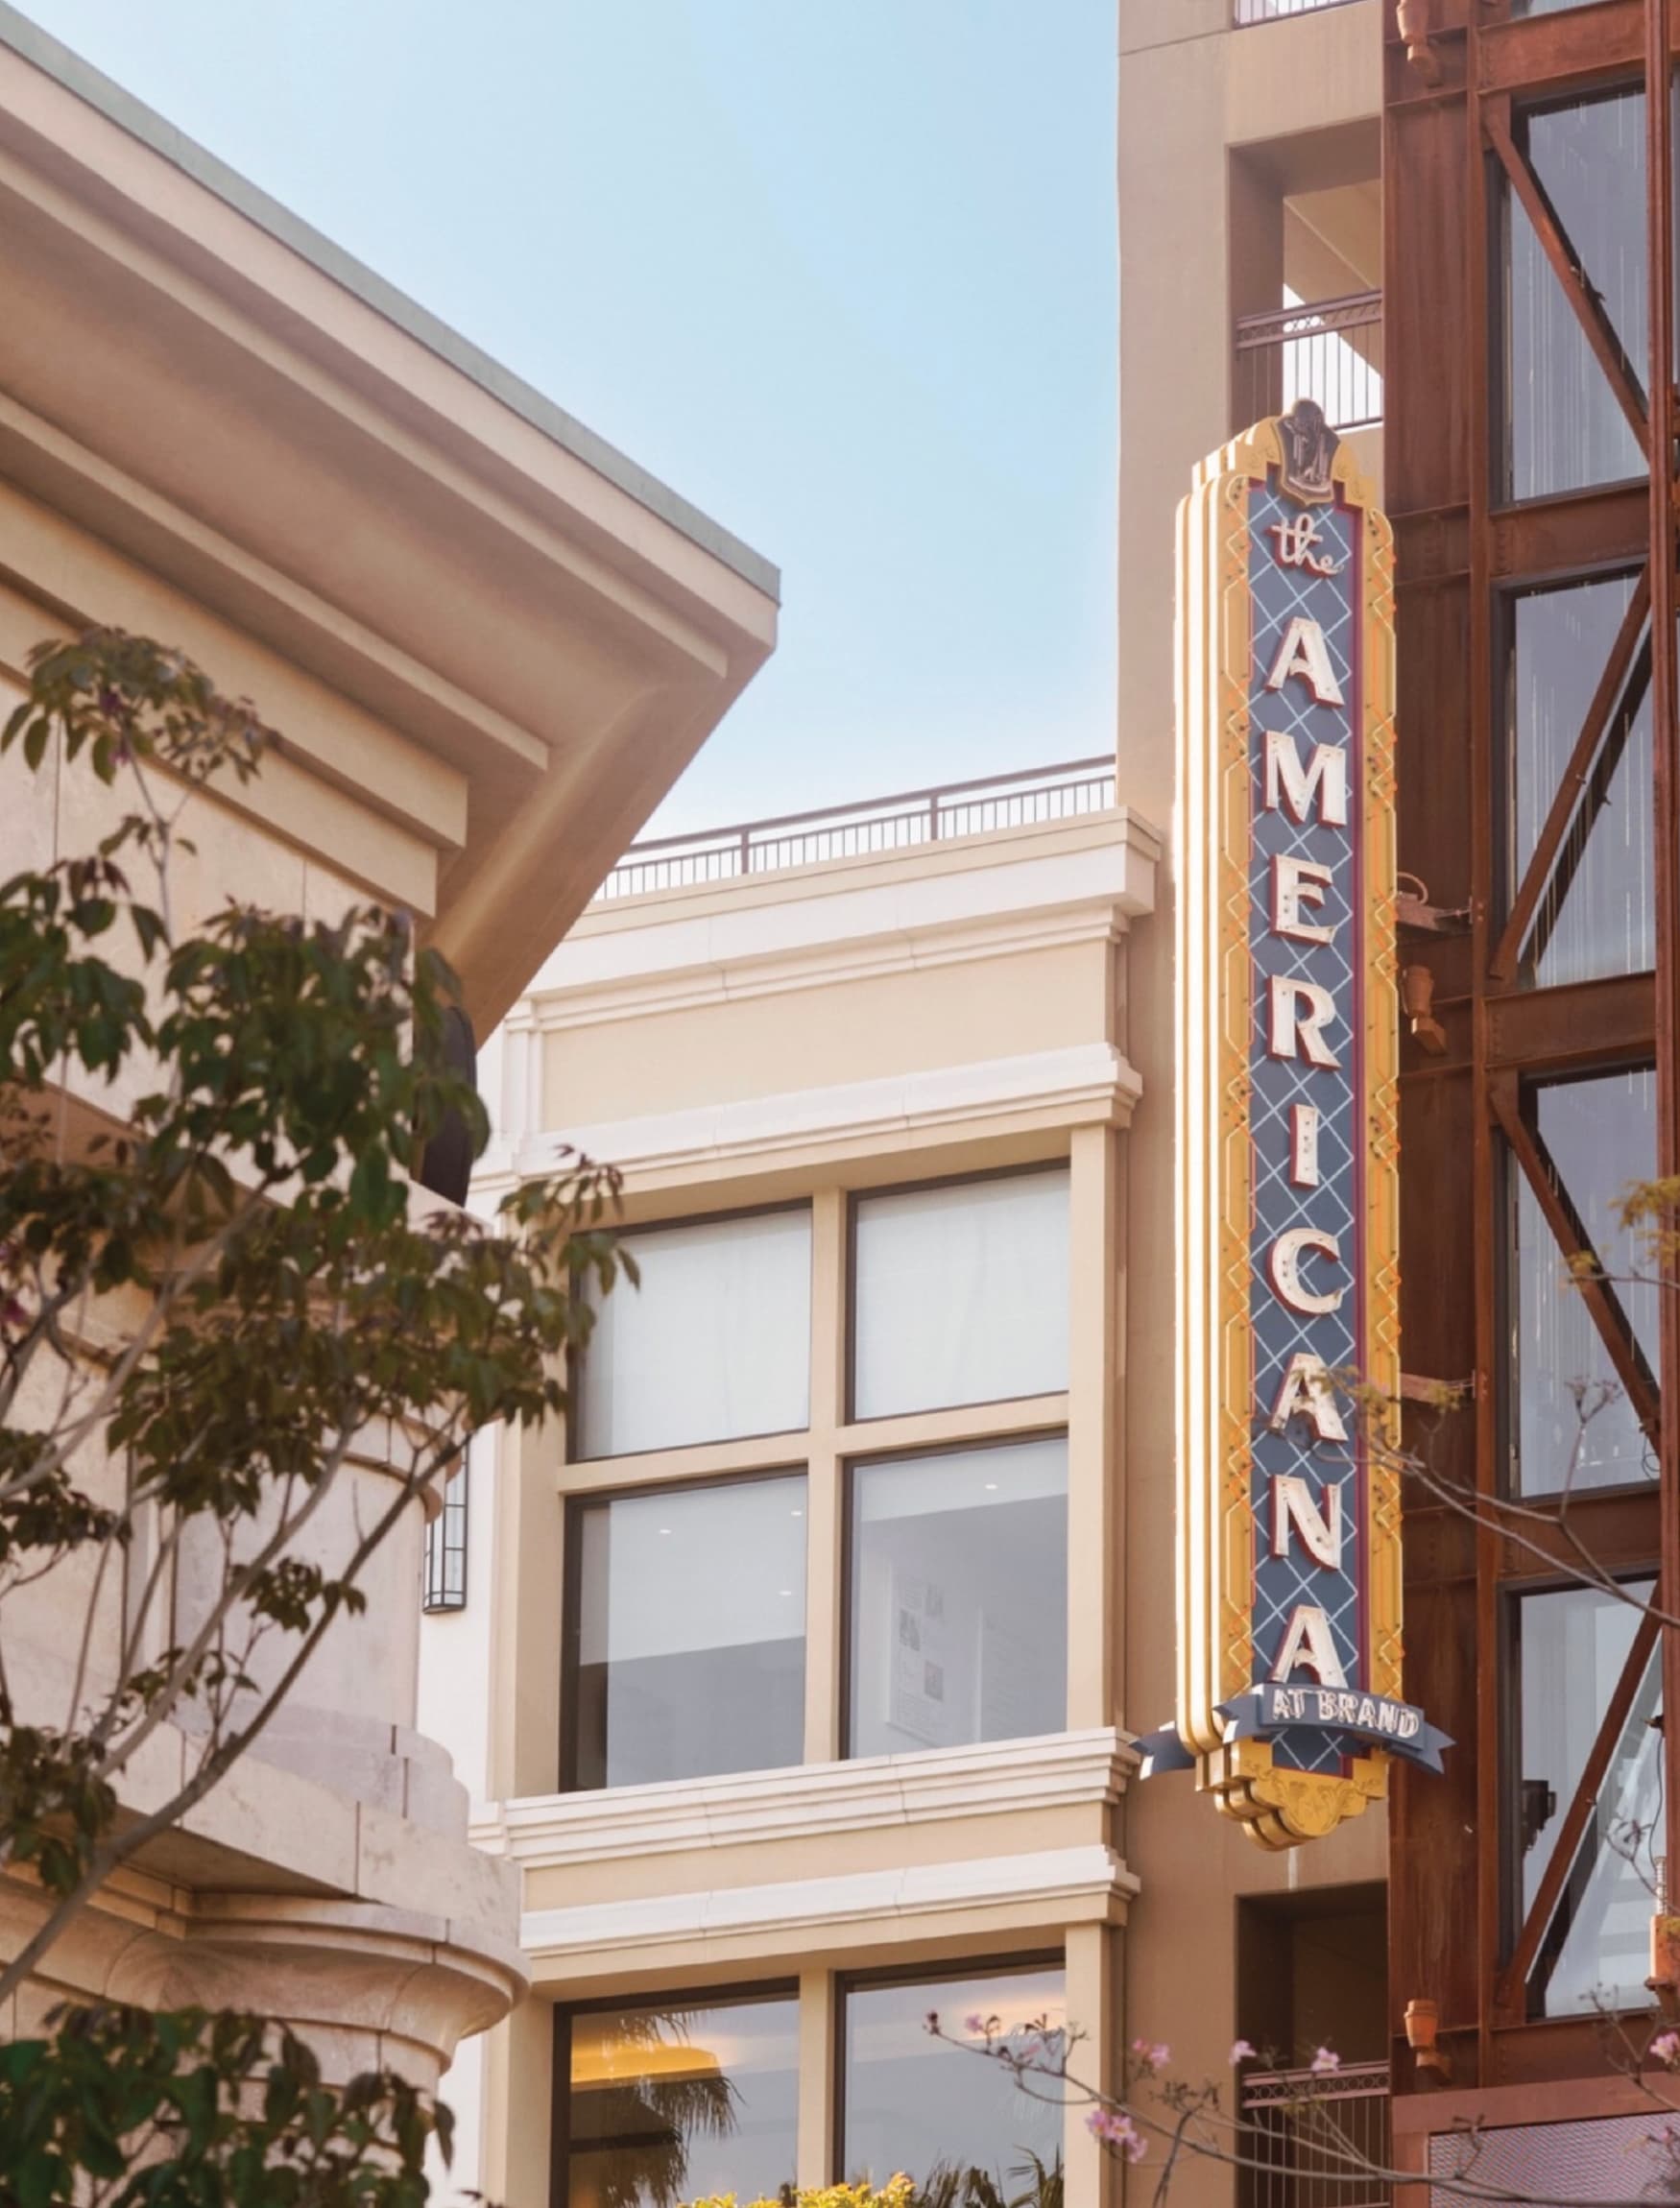 Image of the vertical Americana signage at Americana at Brand